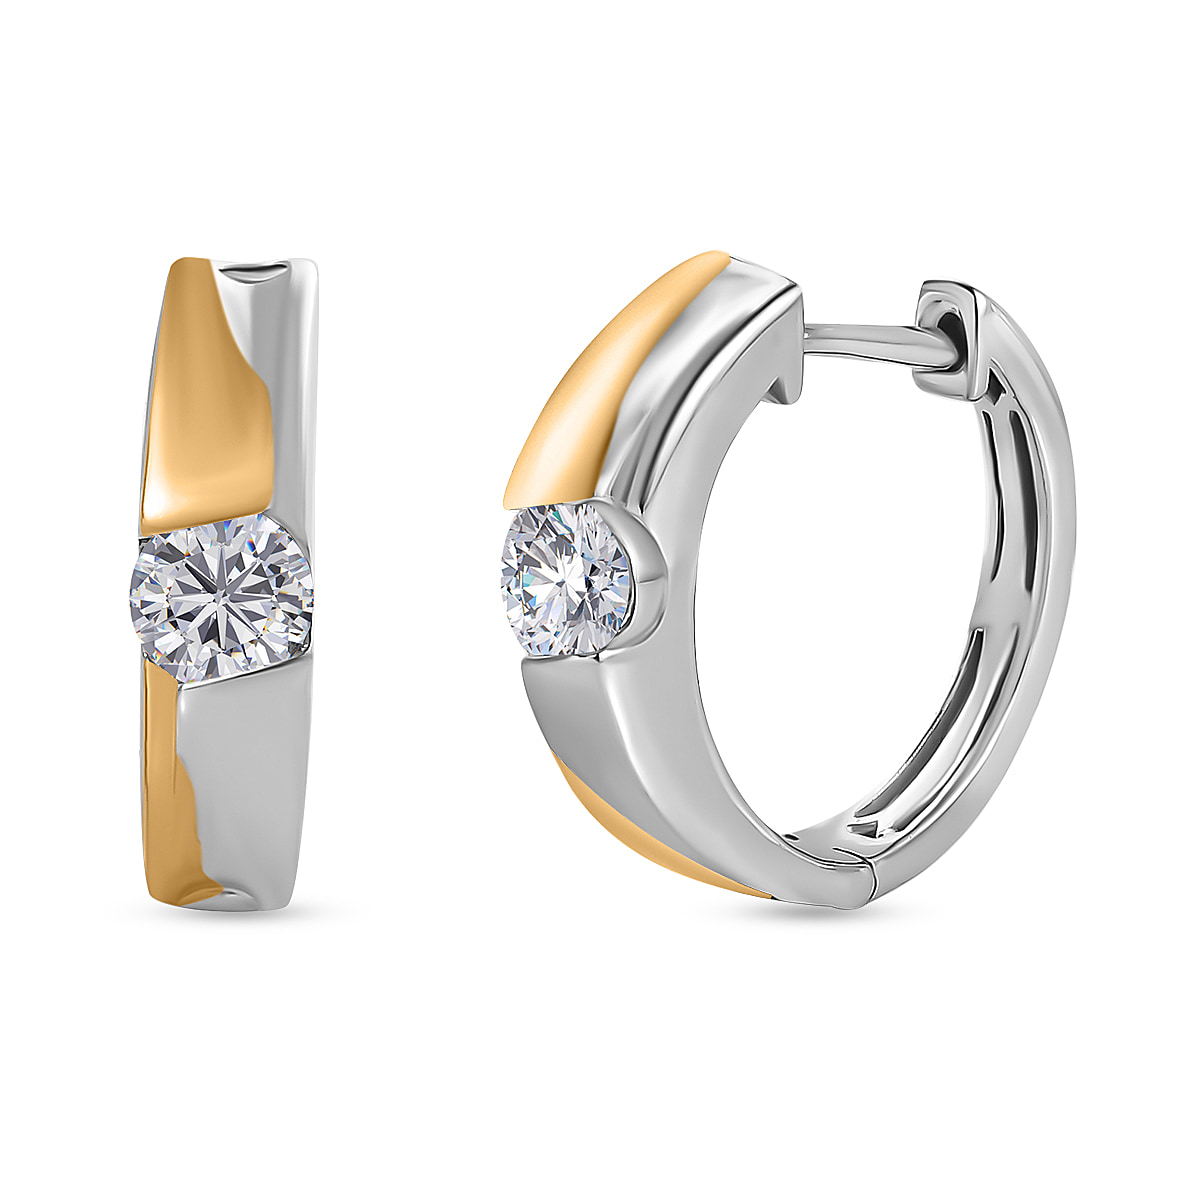 Moissanite Solitaire Hoop Earrings in 18K Yellow Gold Vermeil & Platinum Plated Sterling Silver, Silver Wt 5.45 GM